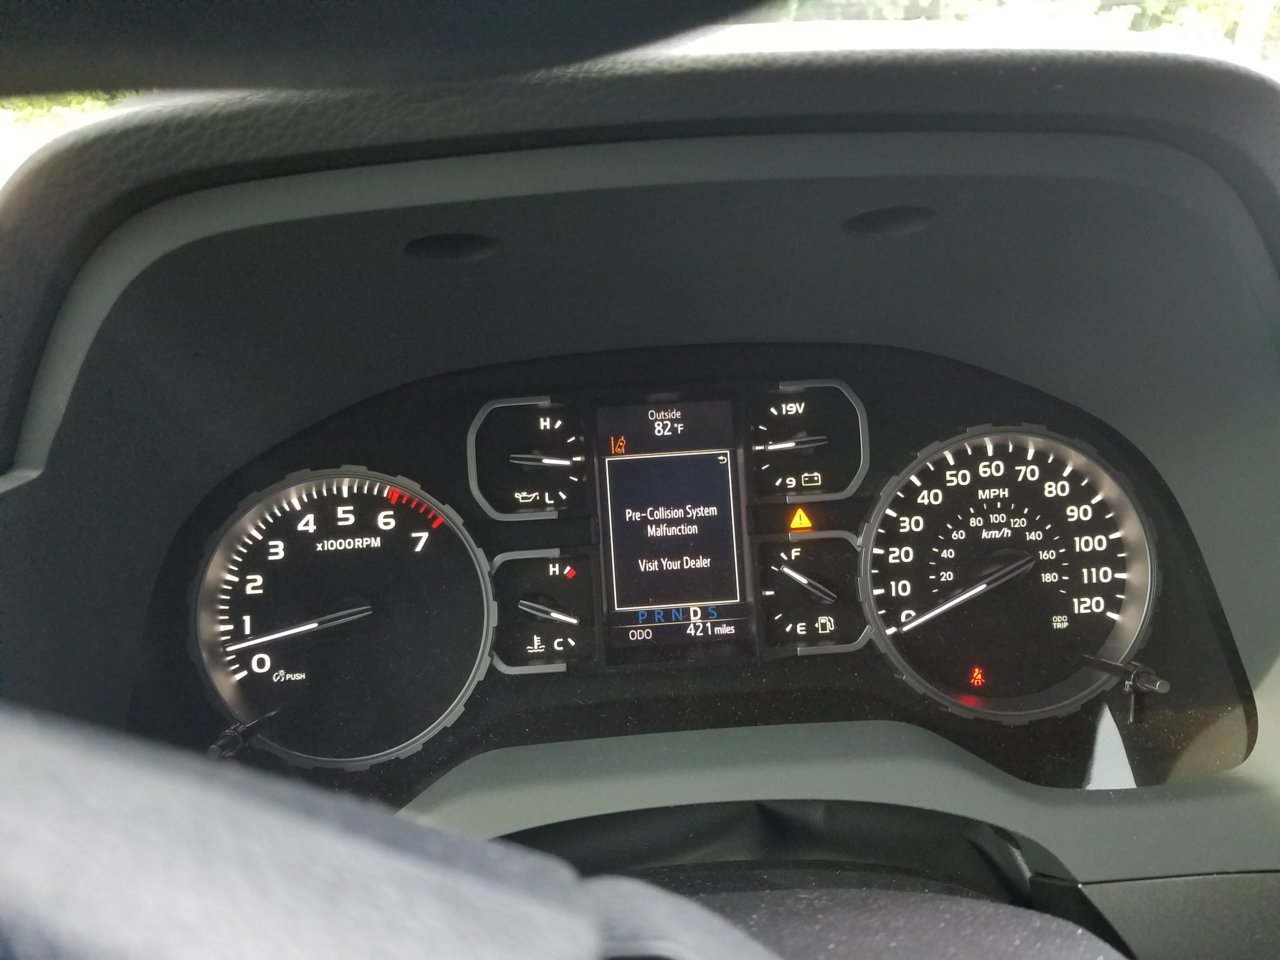 TSS/Pre Collision System Malfunction.... | Toyota Tundra Forum 2018 Toyota Tundra Pre Collision System Malfunction